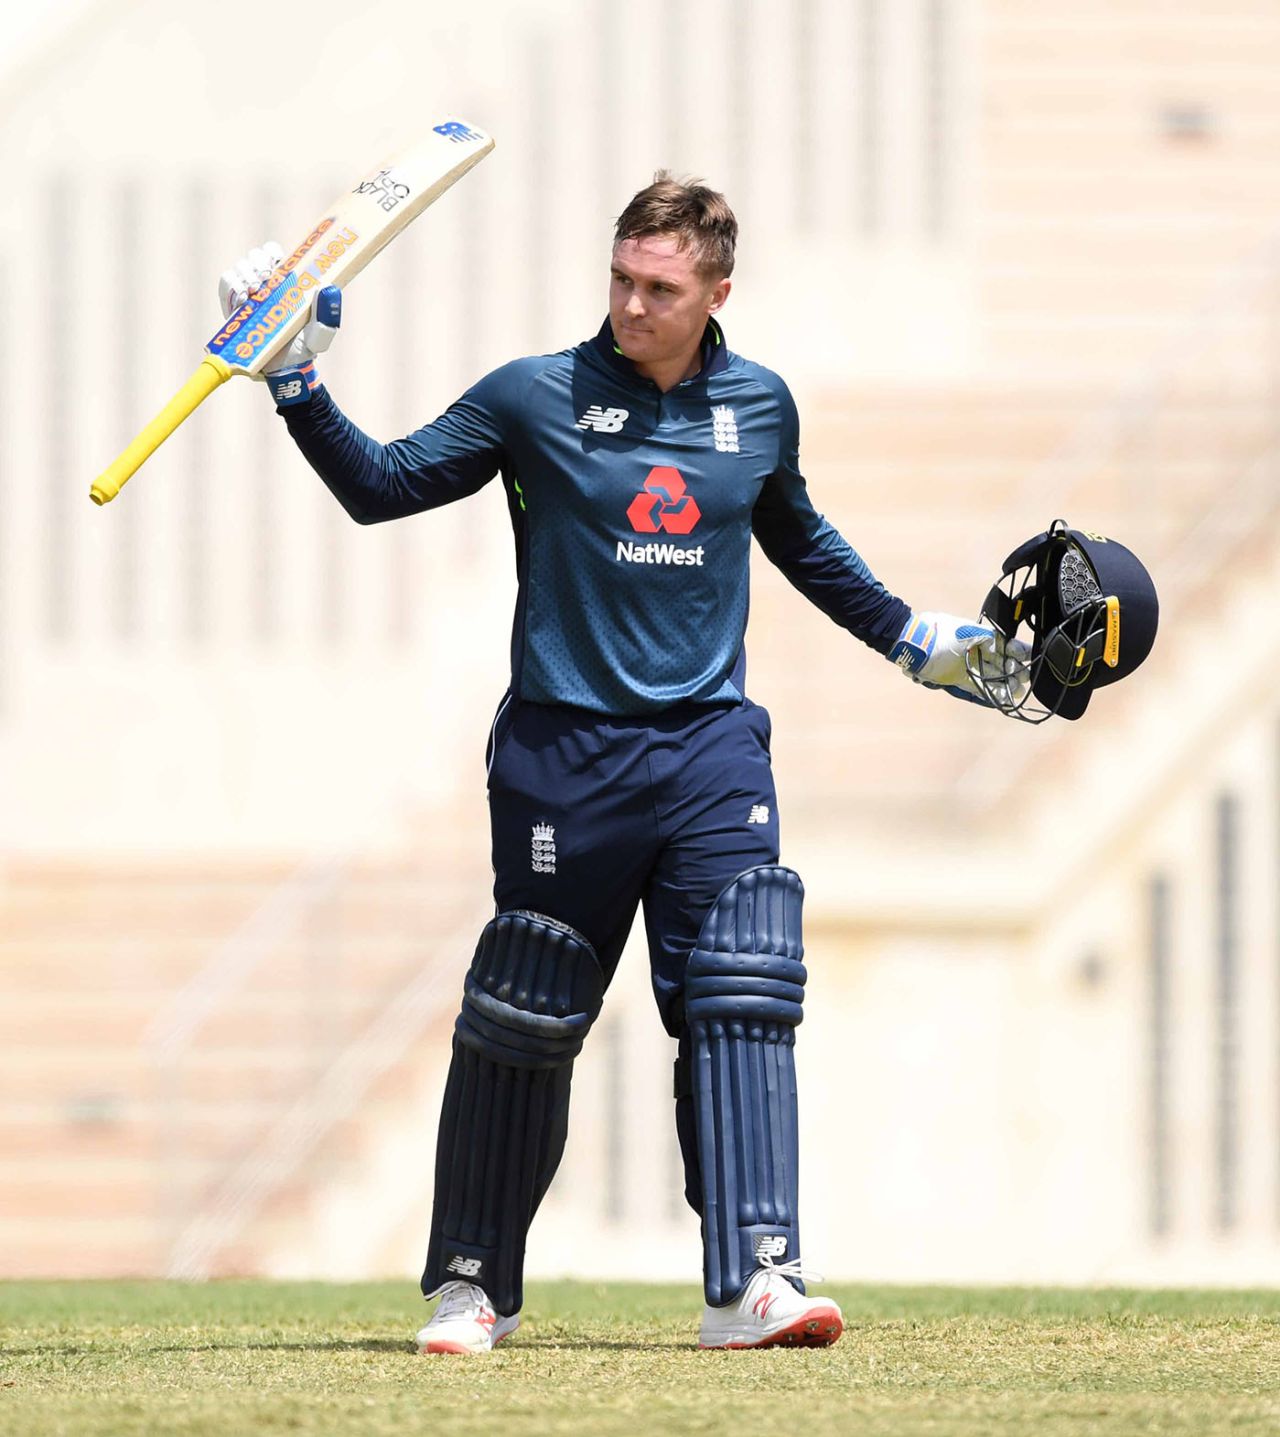 Jason Roy acknowledges his hundred, UWI Vice Chancellor's XI v England, Tour match, Barbados, February 17, 2019